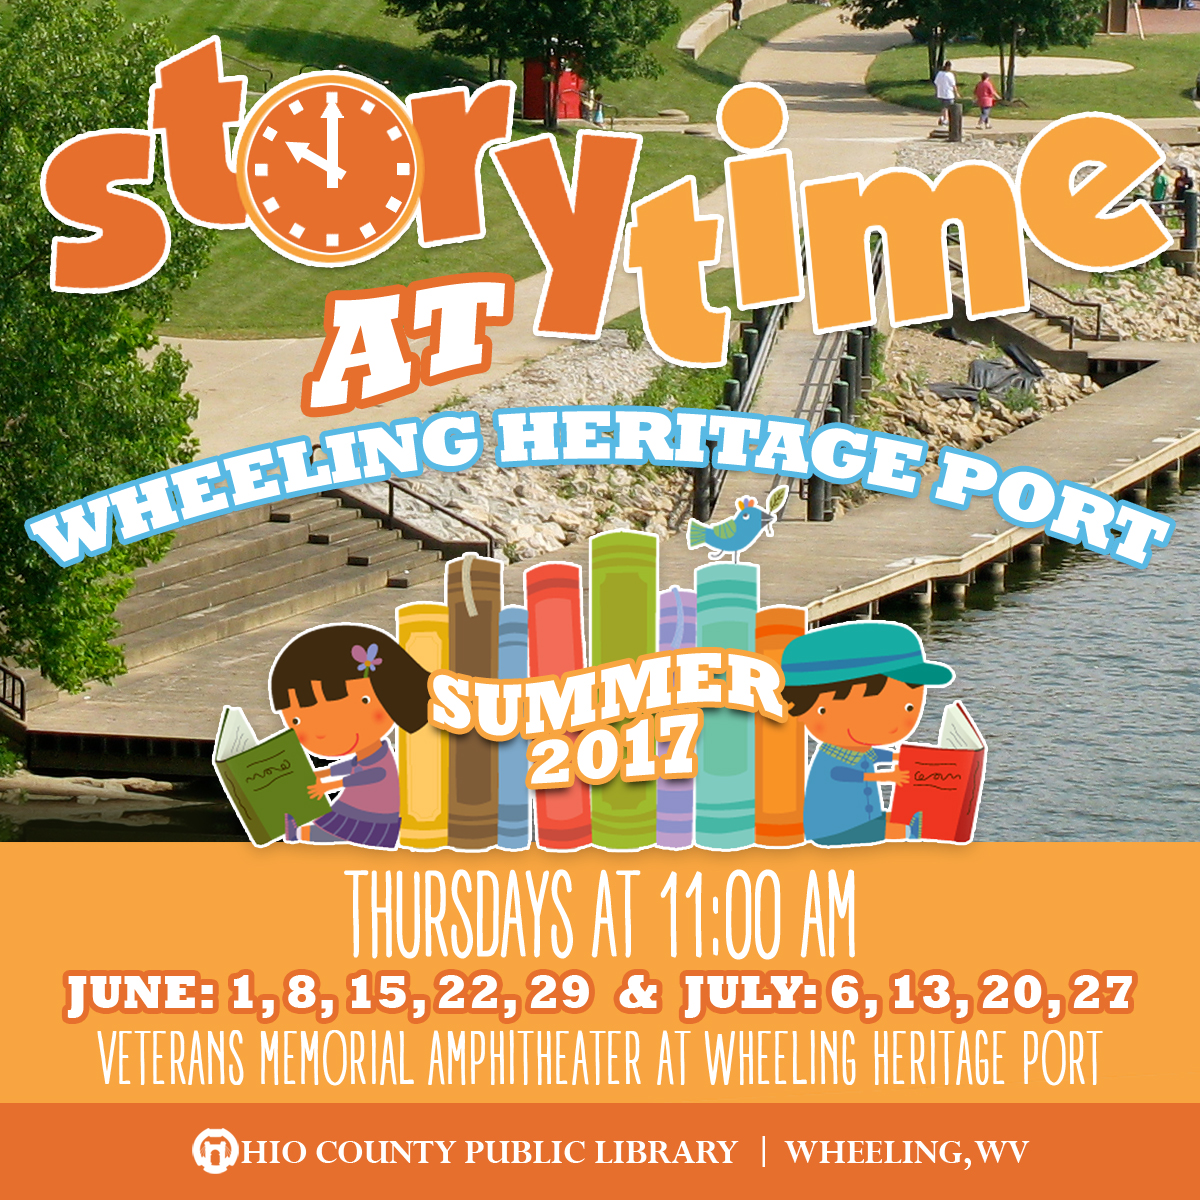 Story time at Heritage Port: Summer 2017